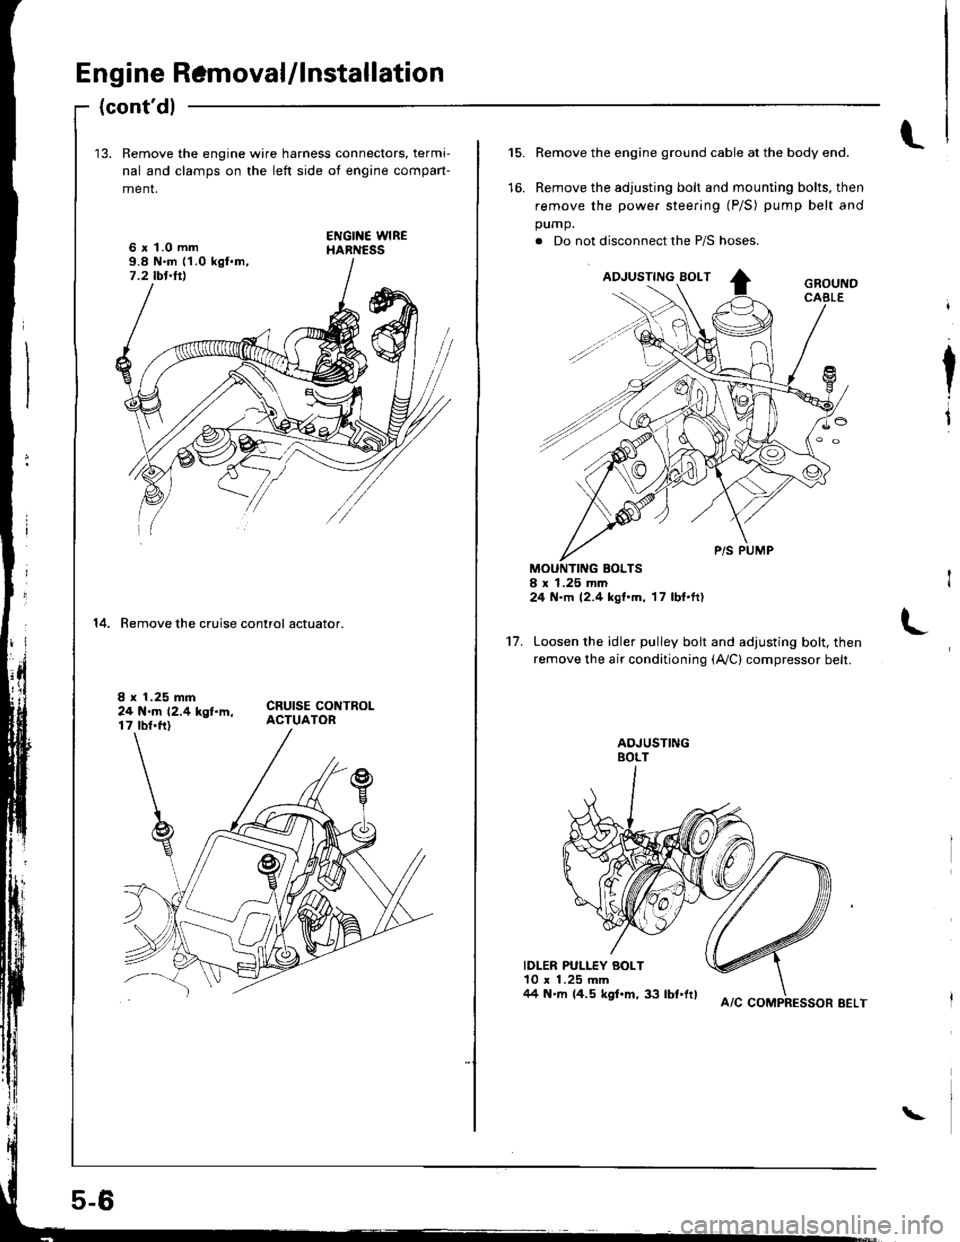 HONDA INTEGRA 1998 4.G Service Manual Engine Ramoval/lnstallation
(contdl
13. Remove the engine wire harness connectors, termi-
nal and clamps on the left side ot engine compan-
menr,
6 x 1.0 mm9.8 N.m 11.0 kgl.m,7.2 tbt.ttl
14. Remove t